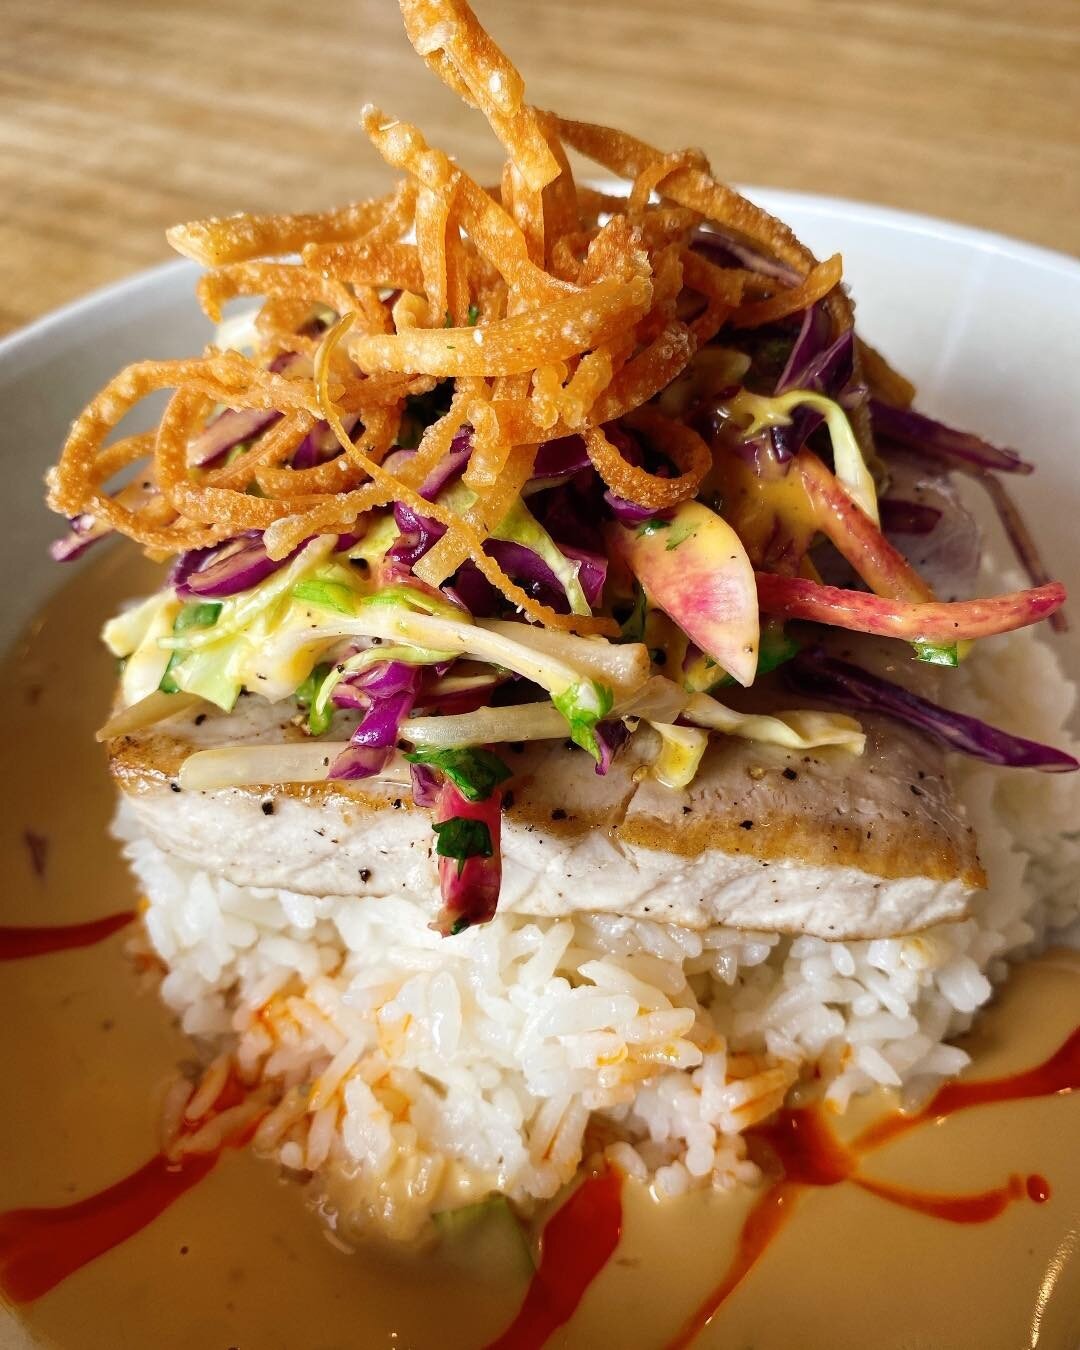 Special for Saturday, May 28:

&lsquo;Ahi Ponzu $20 - Pan seared local ahi,ponzu cream sauce, chili oil topped with a papaya slaw and fried wontons.Choice base 

Shoyu Chicken $16 - Chicken thighs marinated in soy sugar and aromatics with namasu, kim